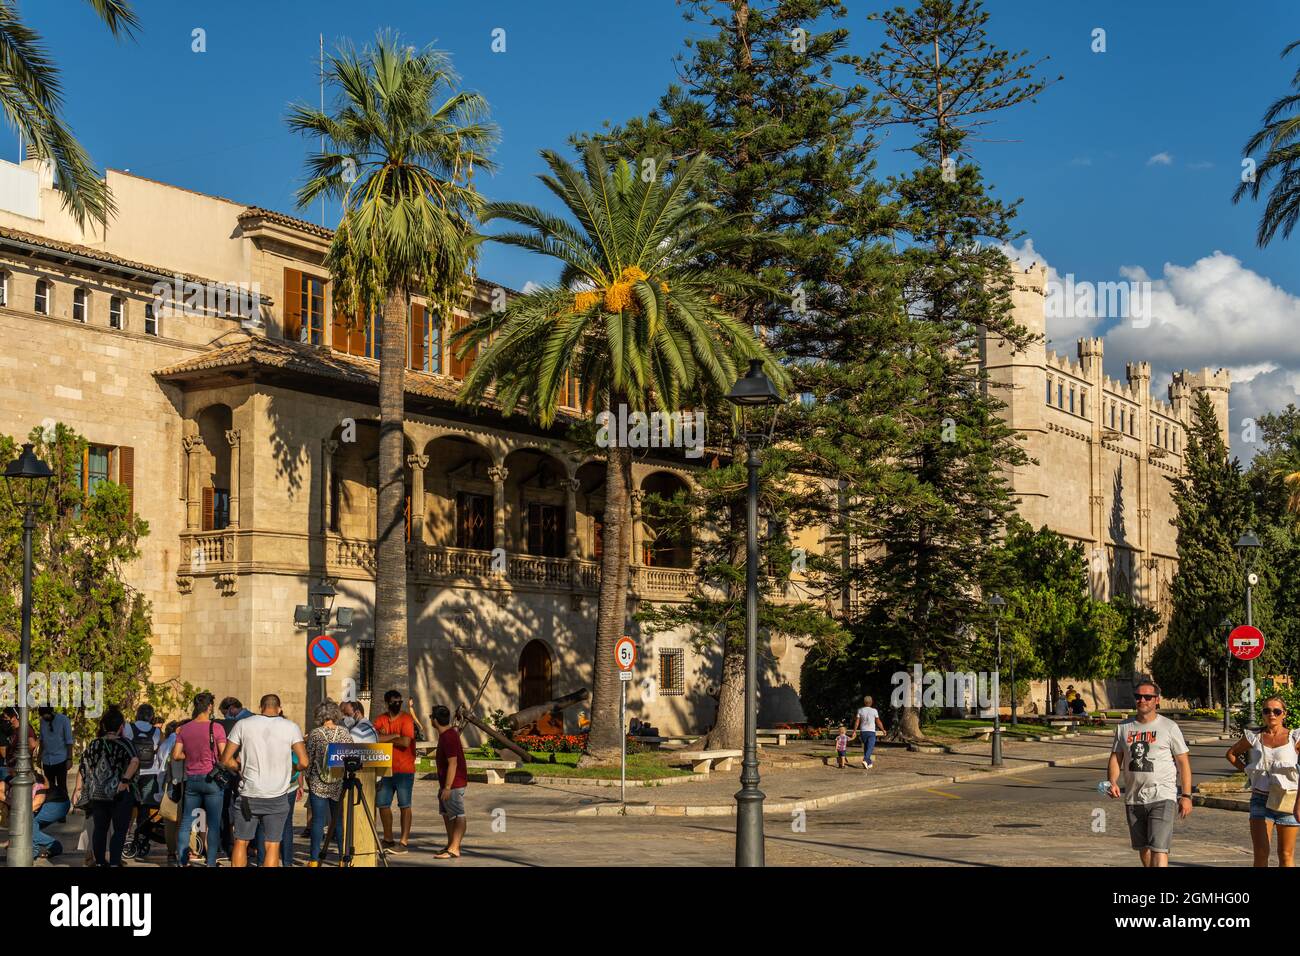 Palma de Mallorca, Spain; september 10 2021: General view of the public building El Consolat de Mar, seat of the Balearic government, next to the goth Stock Photo